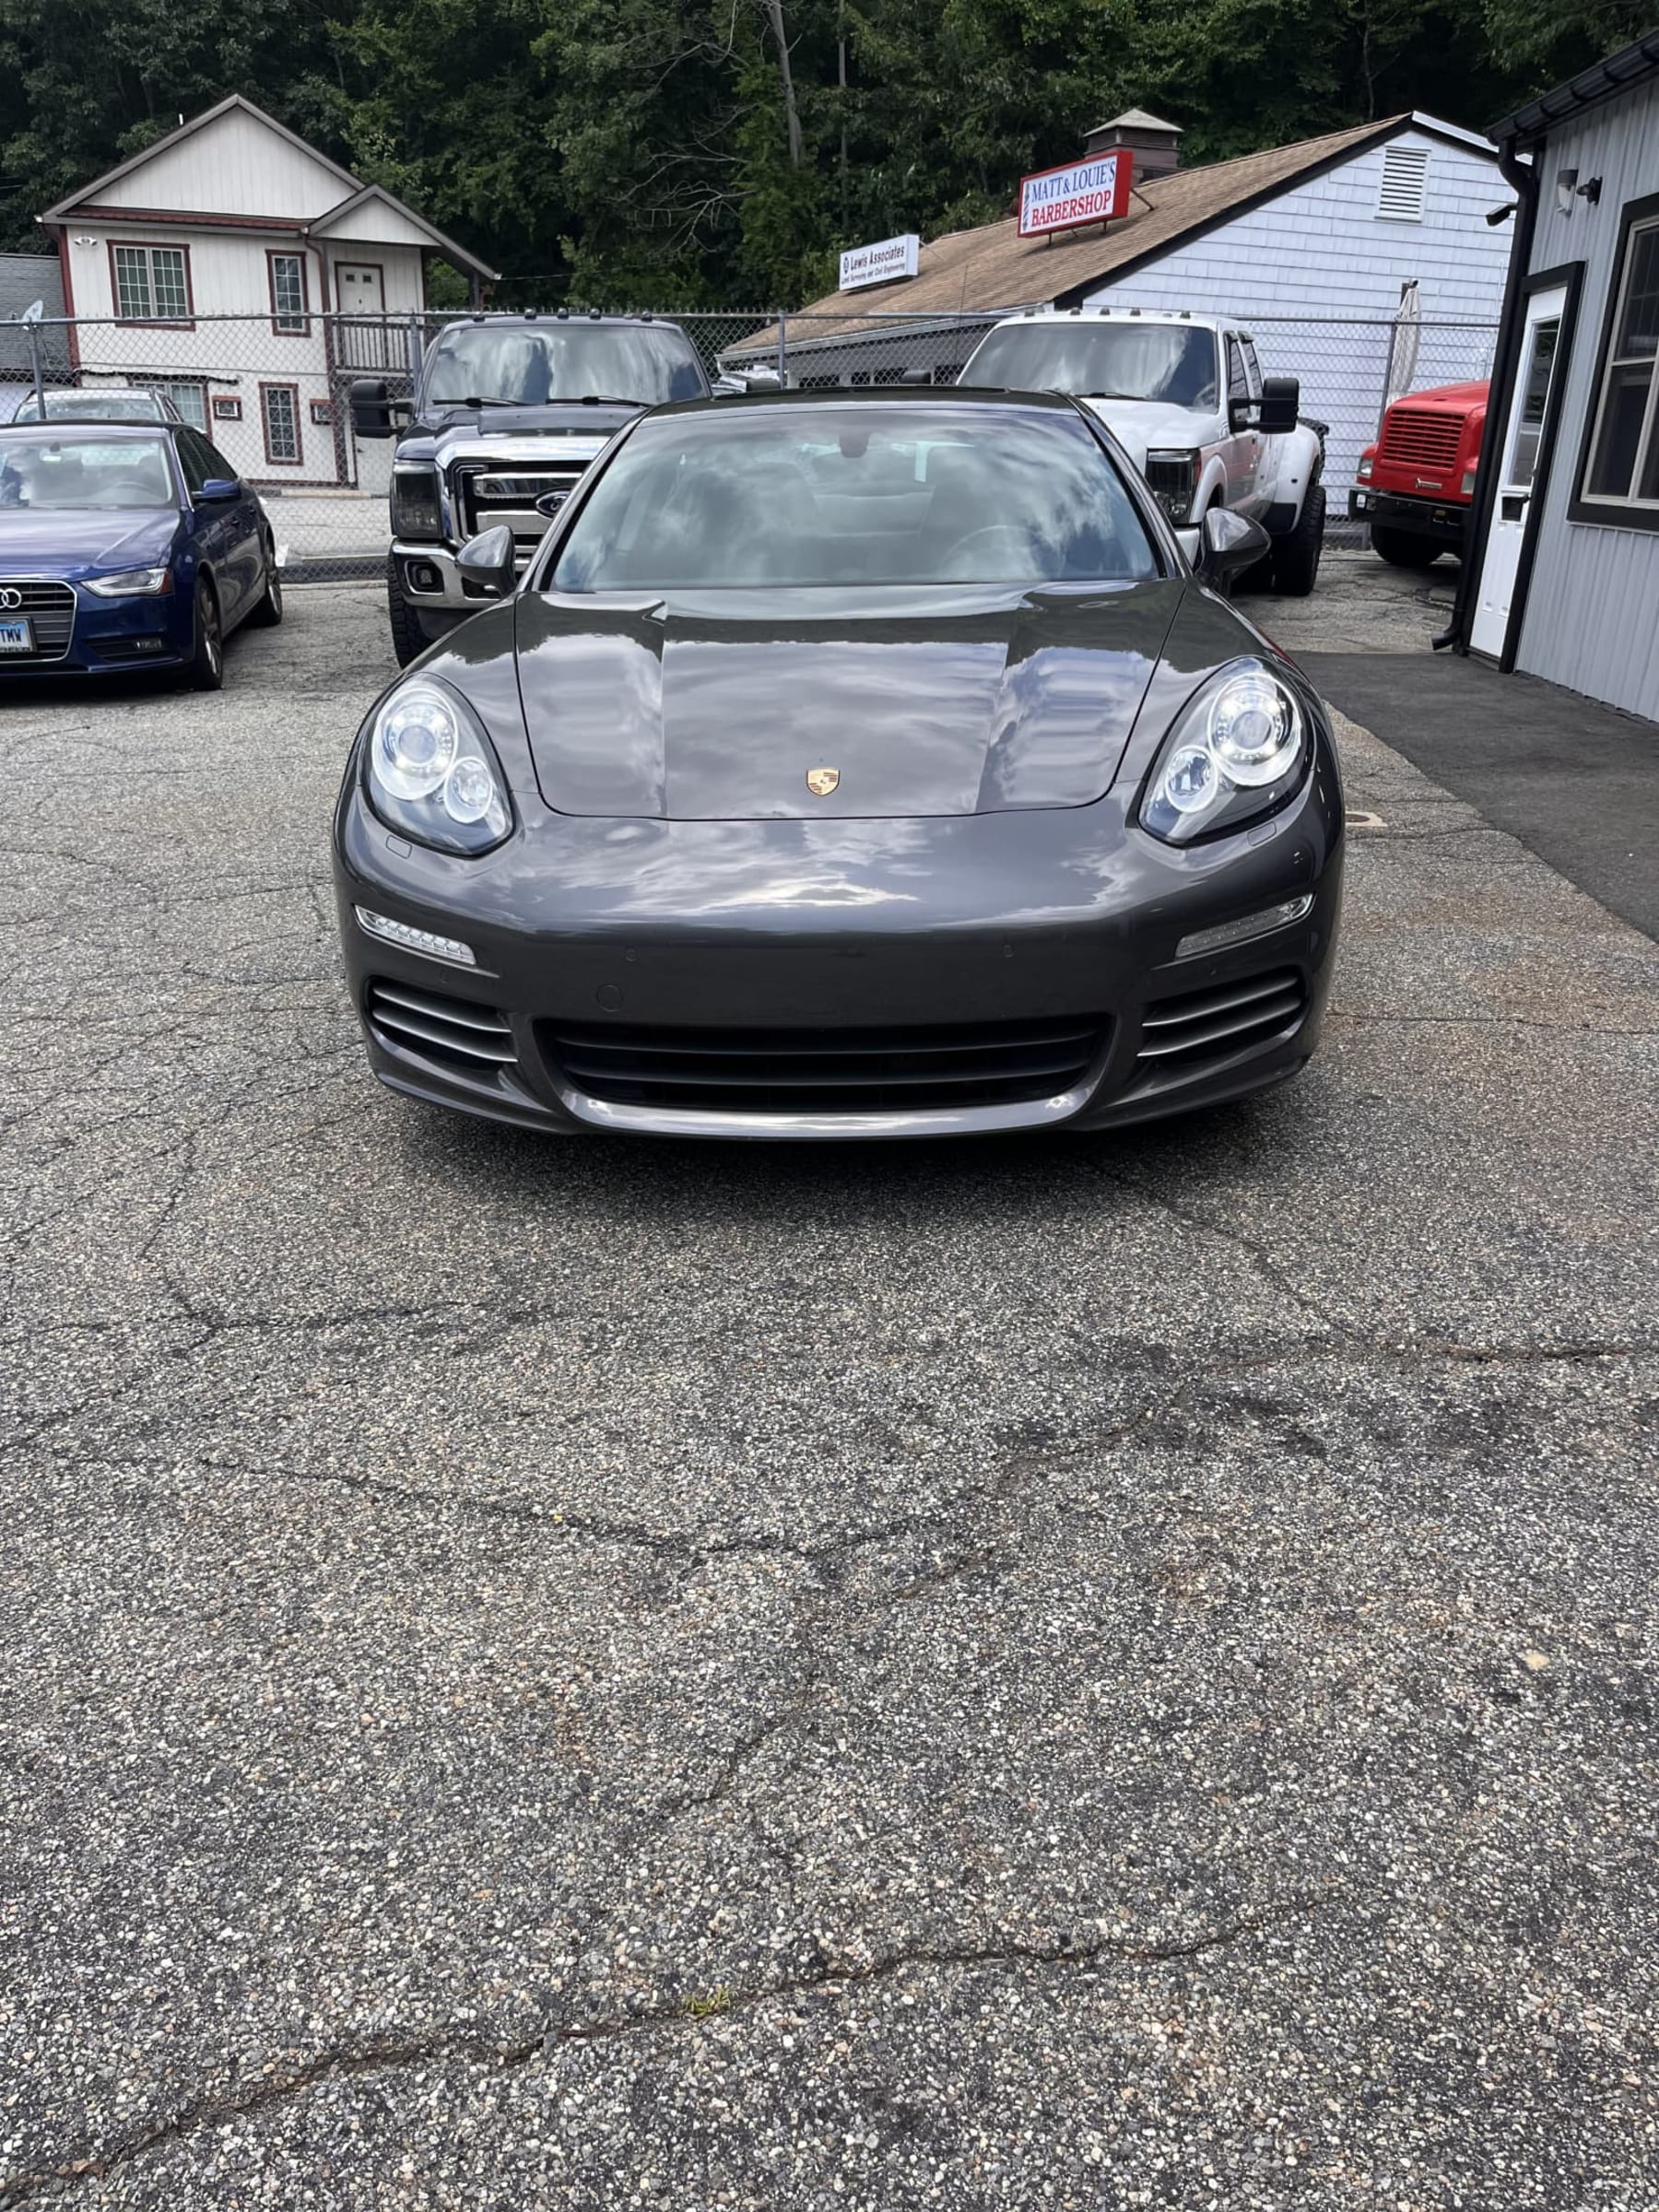 NEW ARRIVAL!! 2015 Porsche Panamera 4!! AWD! One Owner! Clean Carfax! Loaded with Navigation, Heated and Cooled Seats, Heated Rear seats, 19” wheels, Front and Rear park assist, Premium Package, Bose sound system and much much more! Original window sticker was $93,700! Won’t last at Only $25,900!!